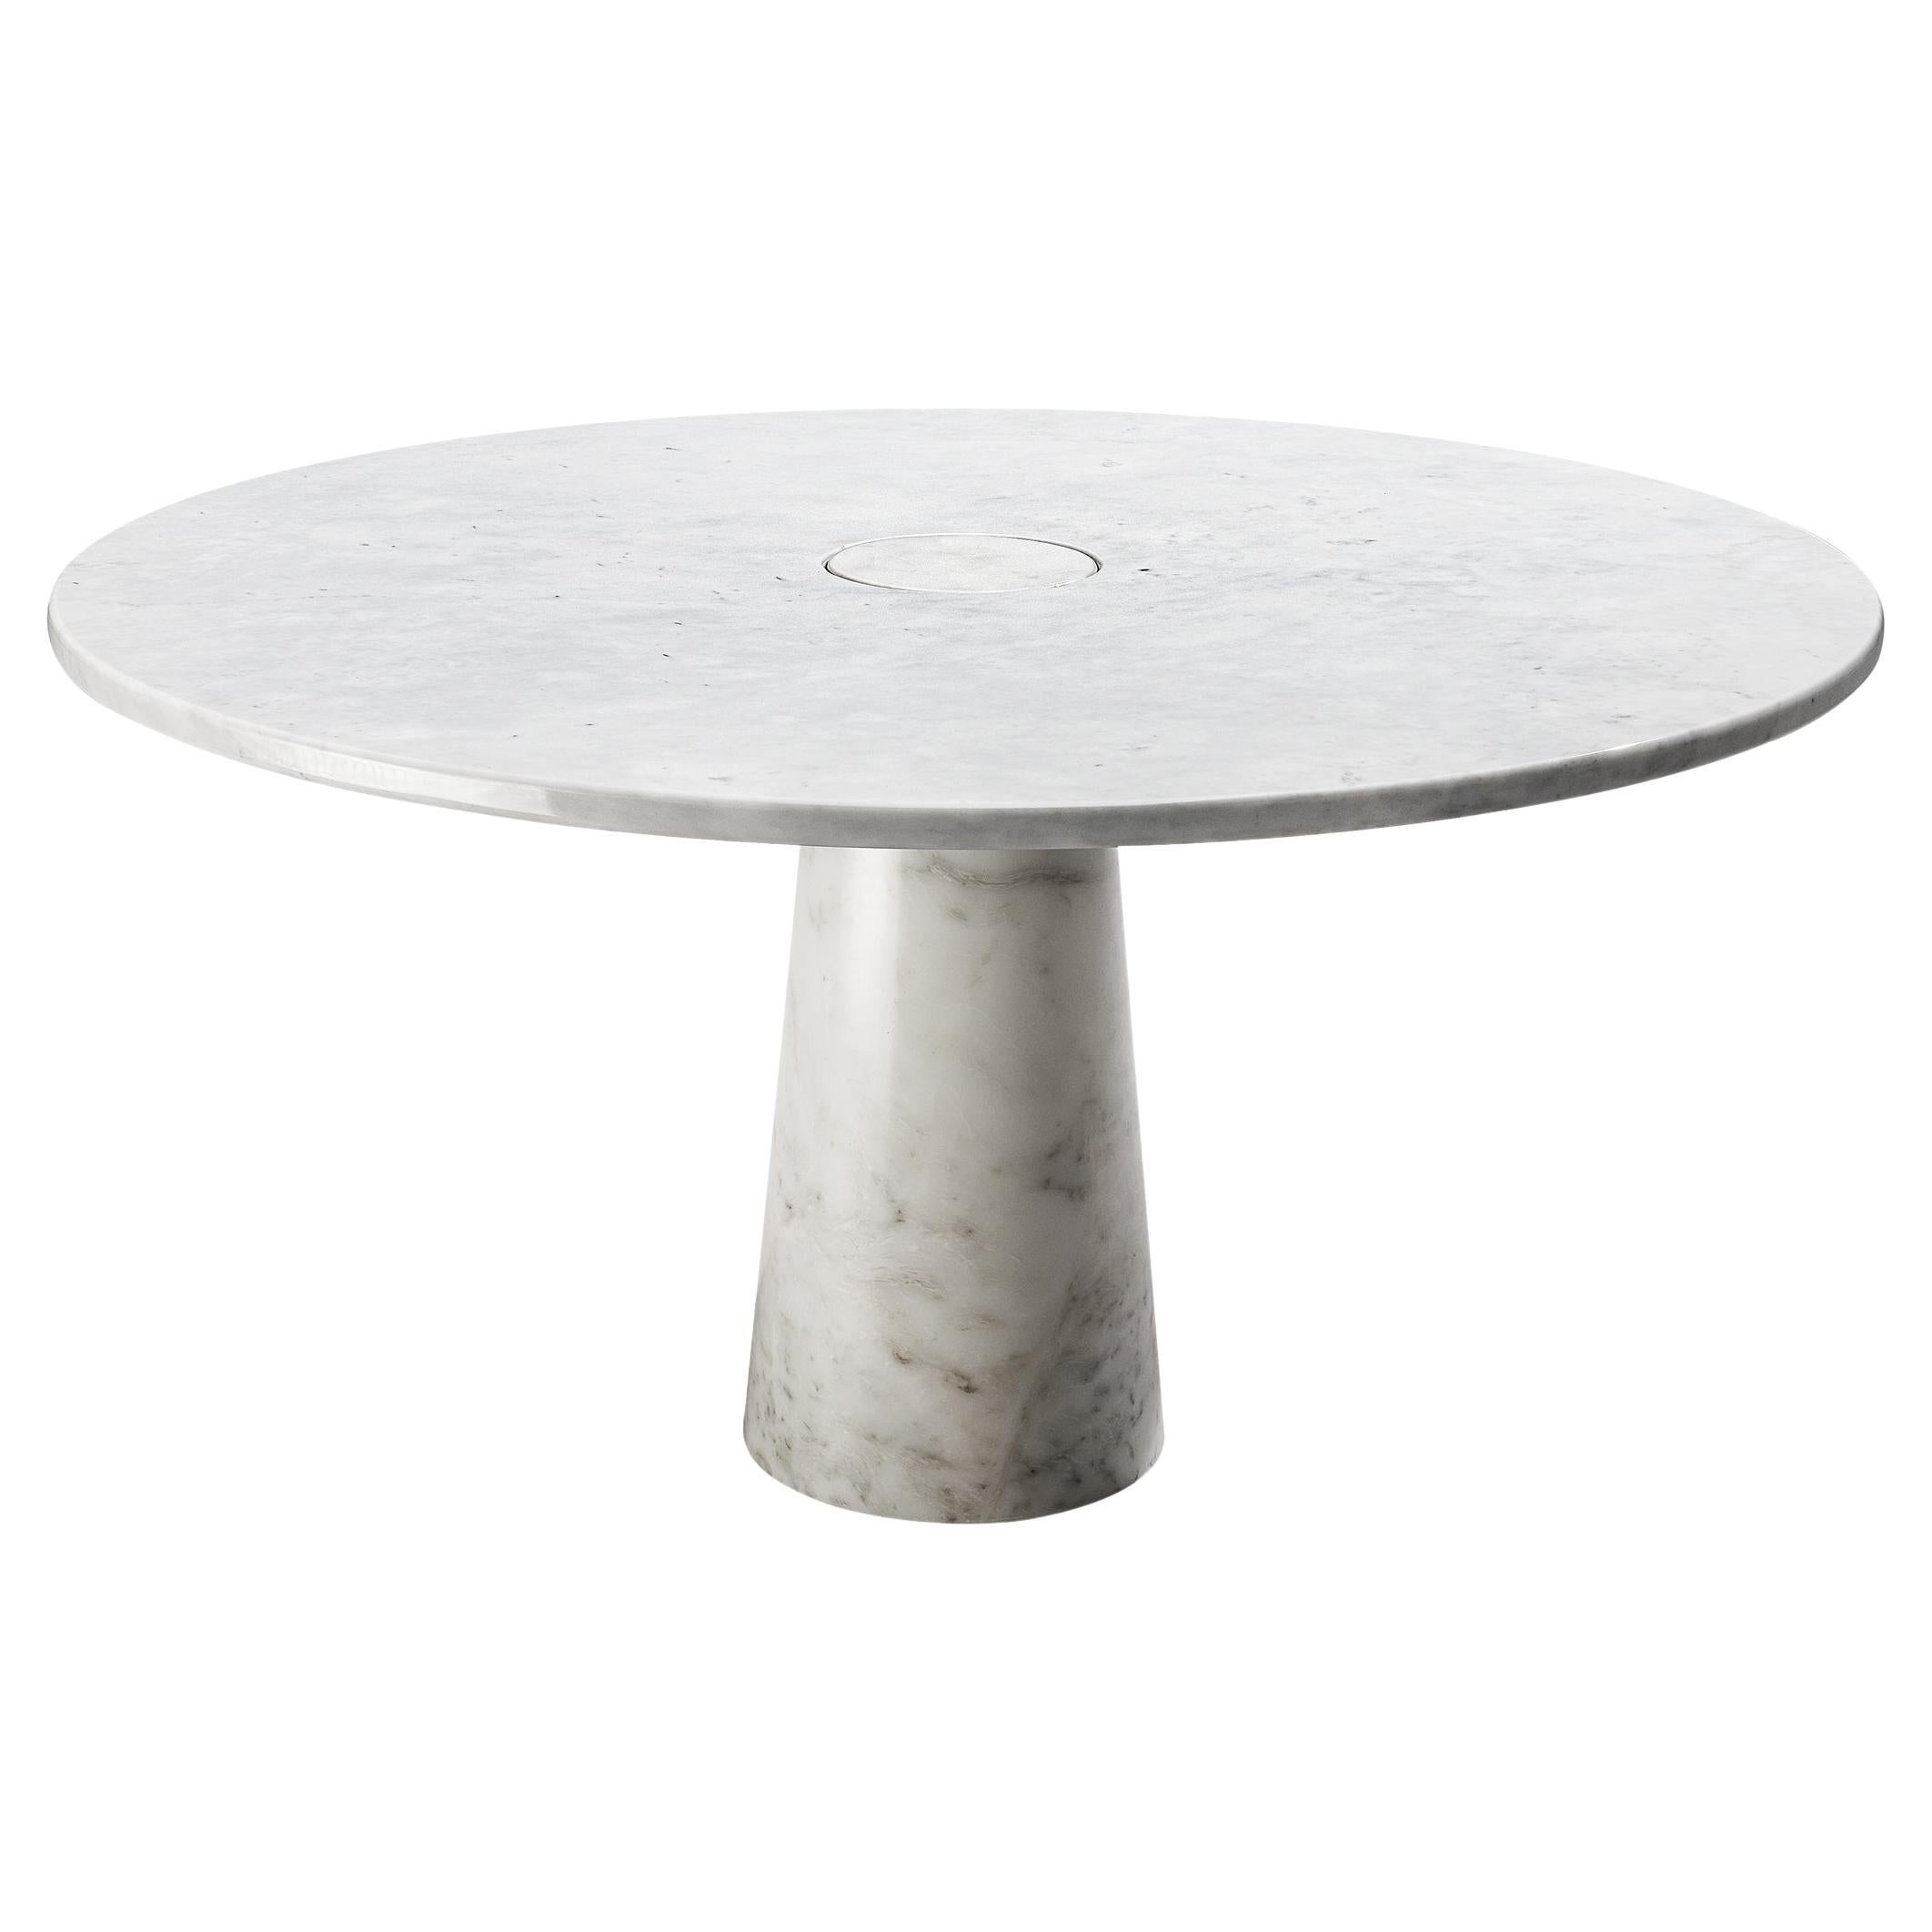 Angelo Mangiarotti for Skipper 'Eros' Dining Table in Carrara Marble